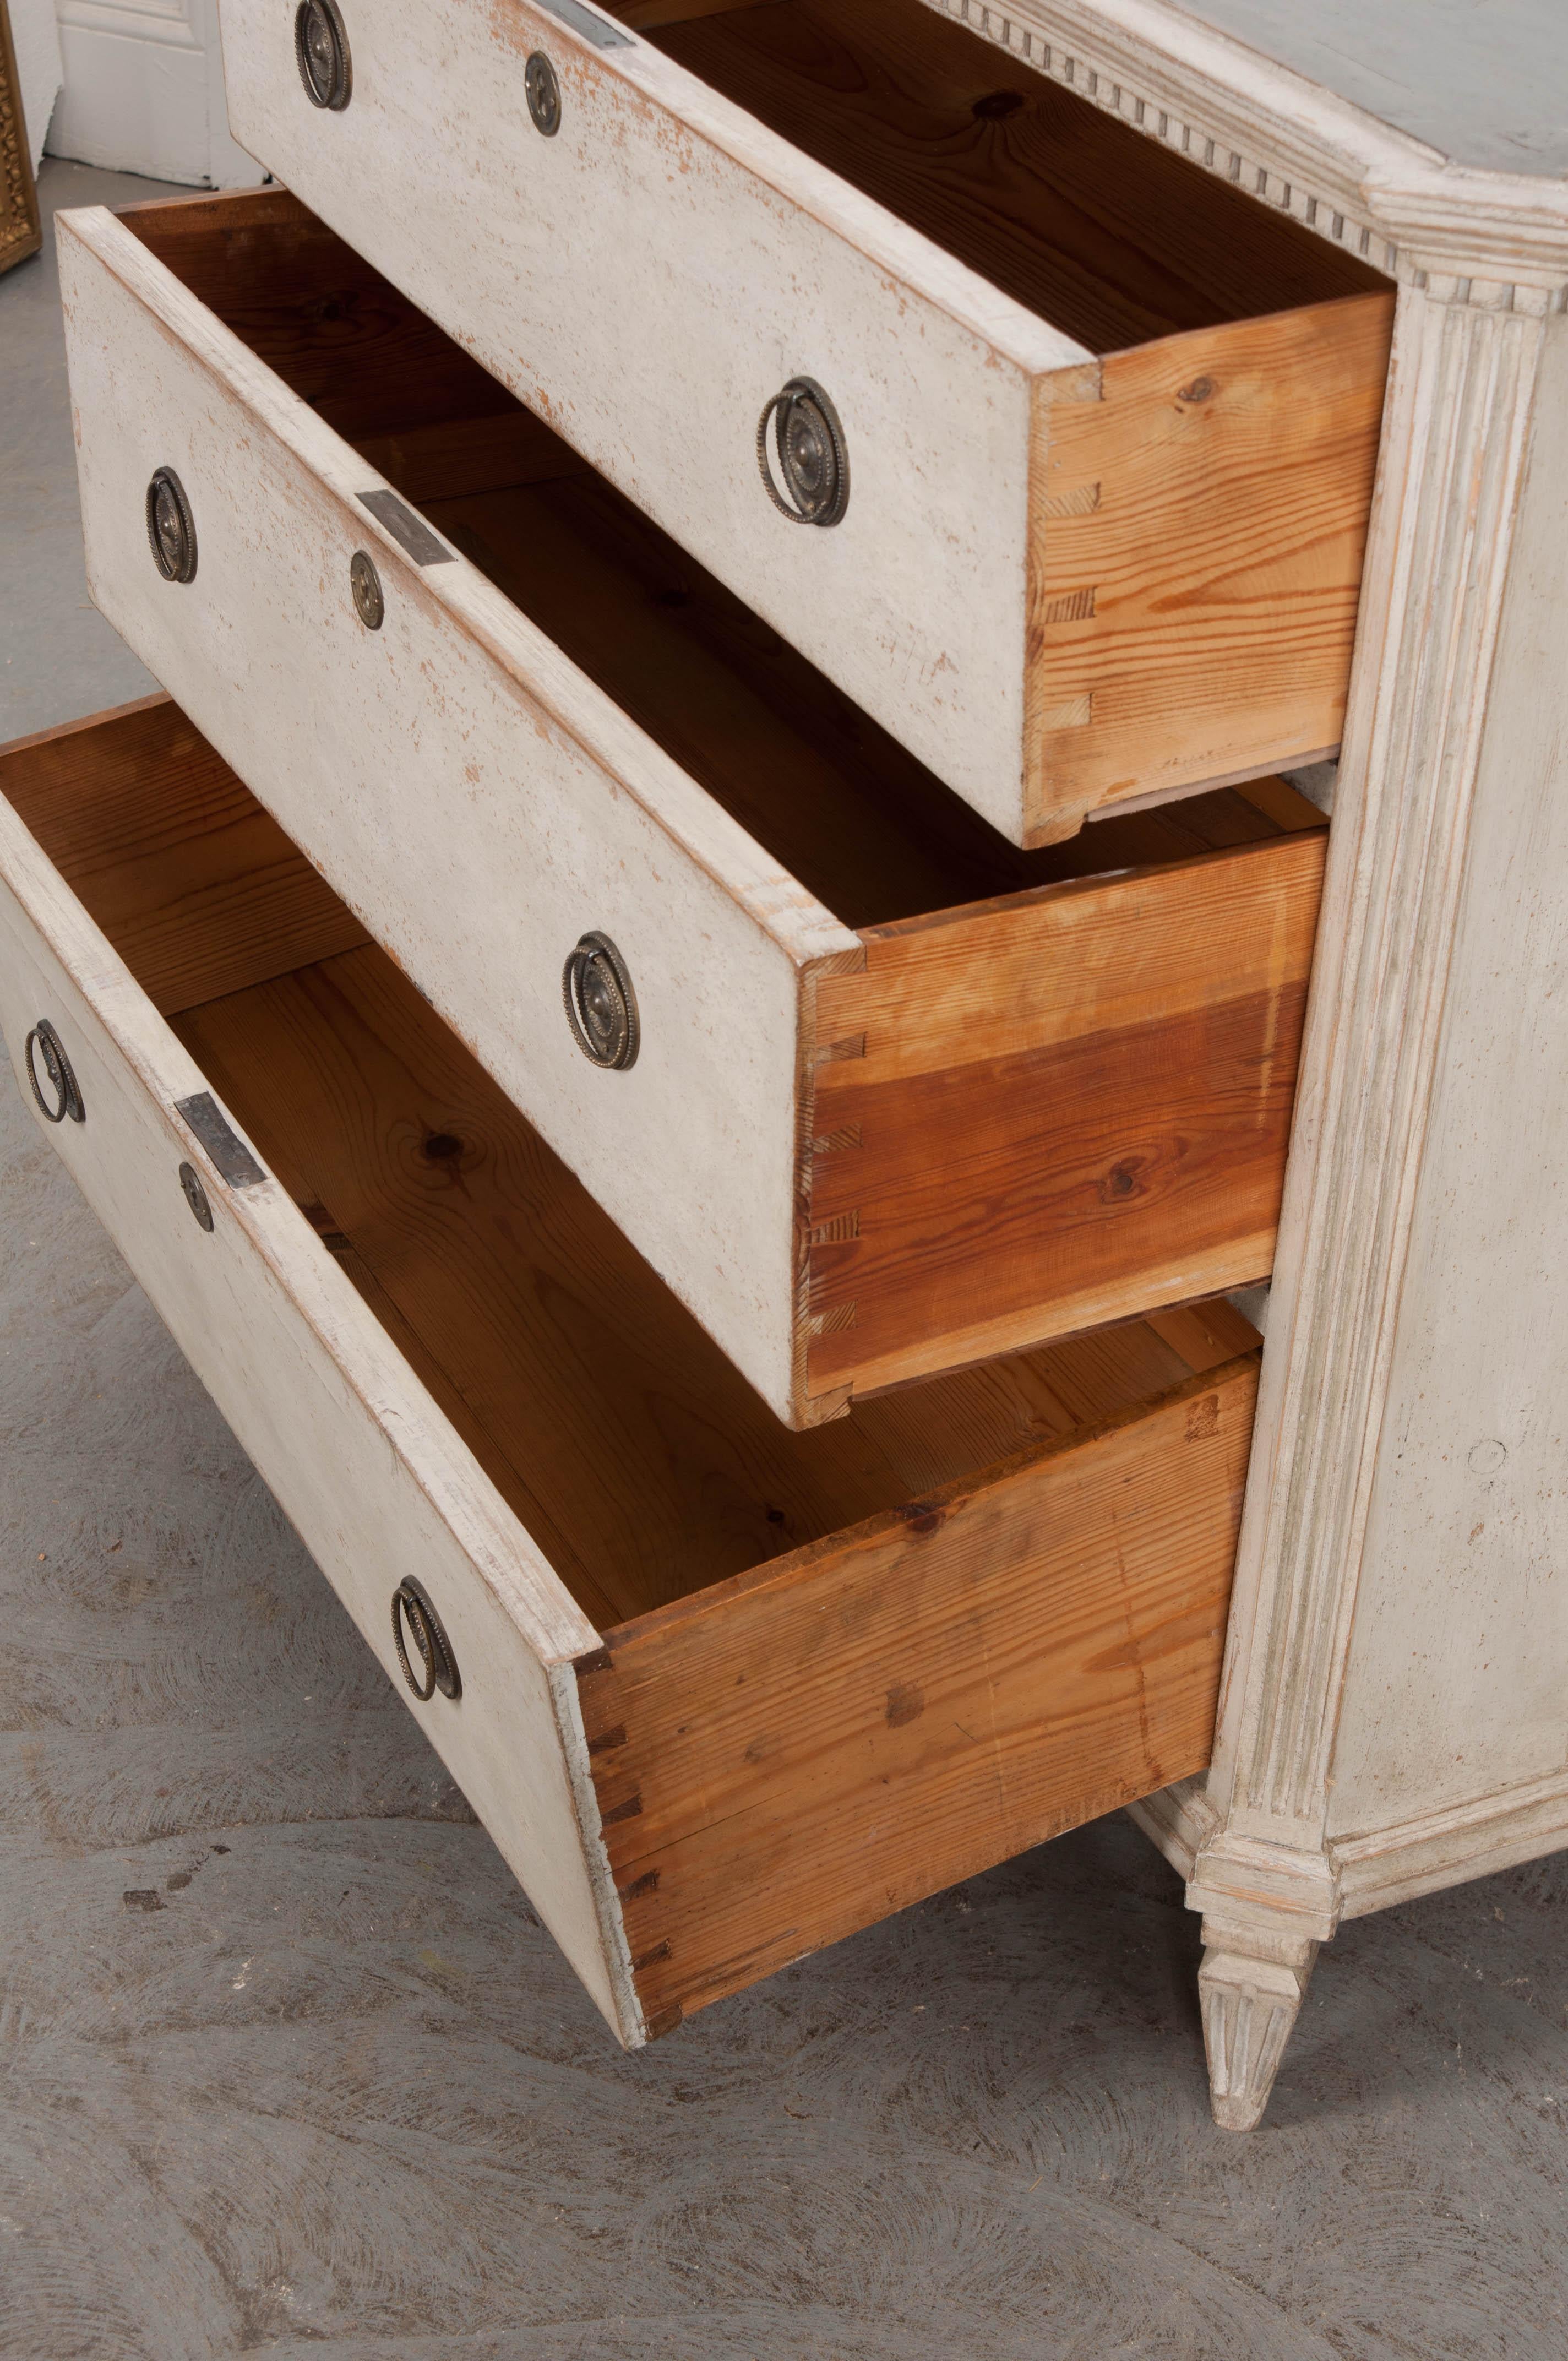 This lovely Swedish neoclassical-style chest, circa 1900, is sure to brighten up any space! Featuring a partially painted conforming surface with dentillated molding over canted and fluted corners and a bank of three graduated drawers, each with